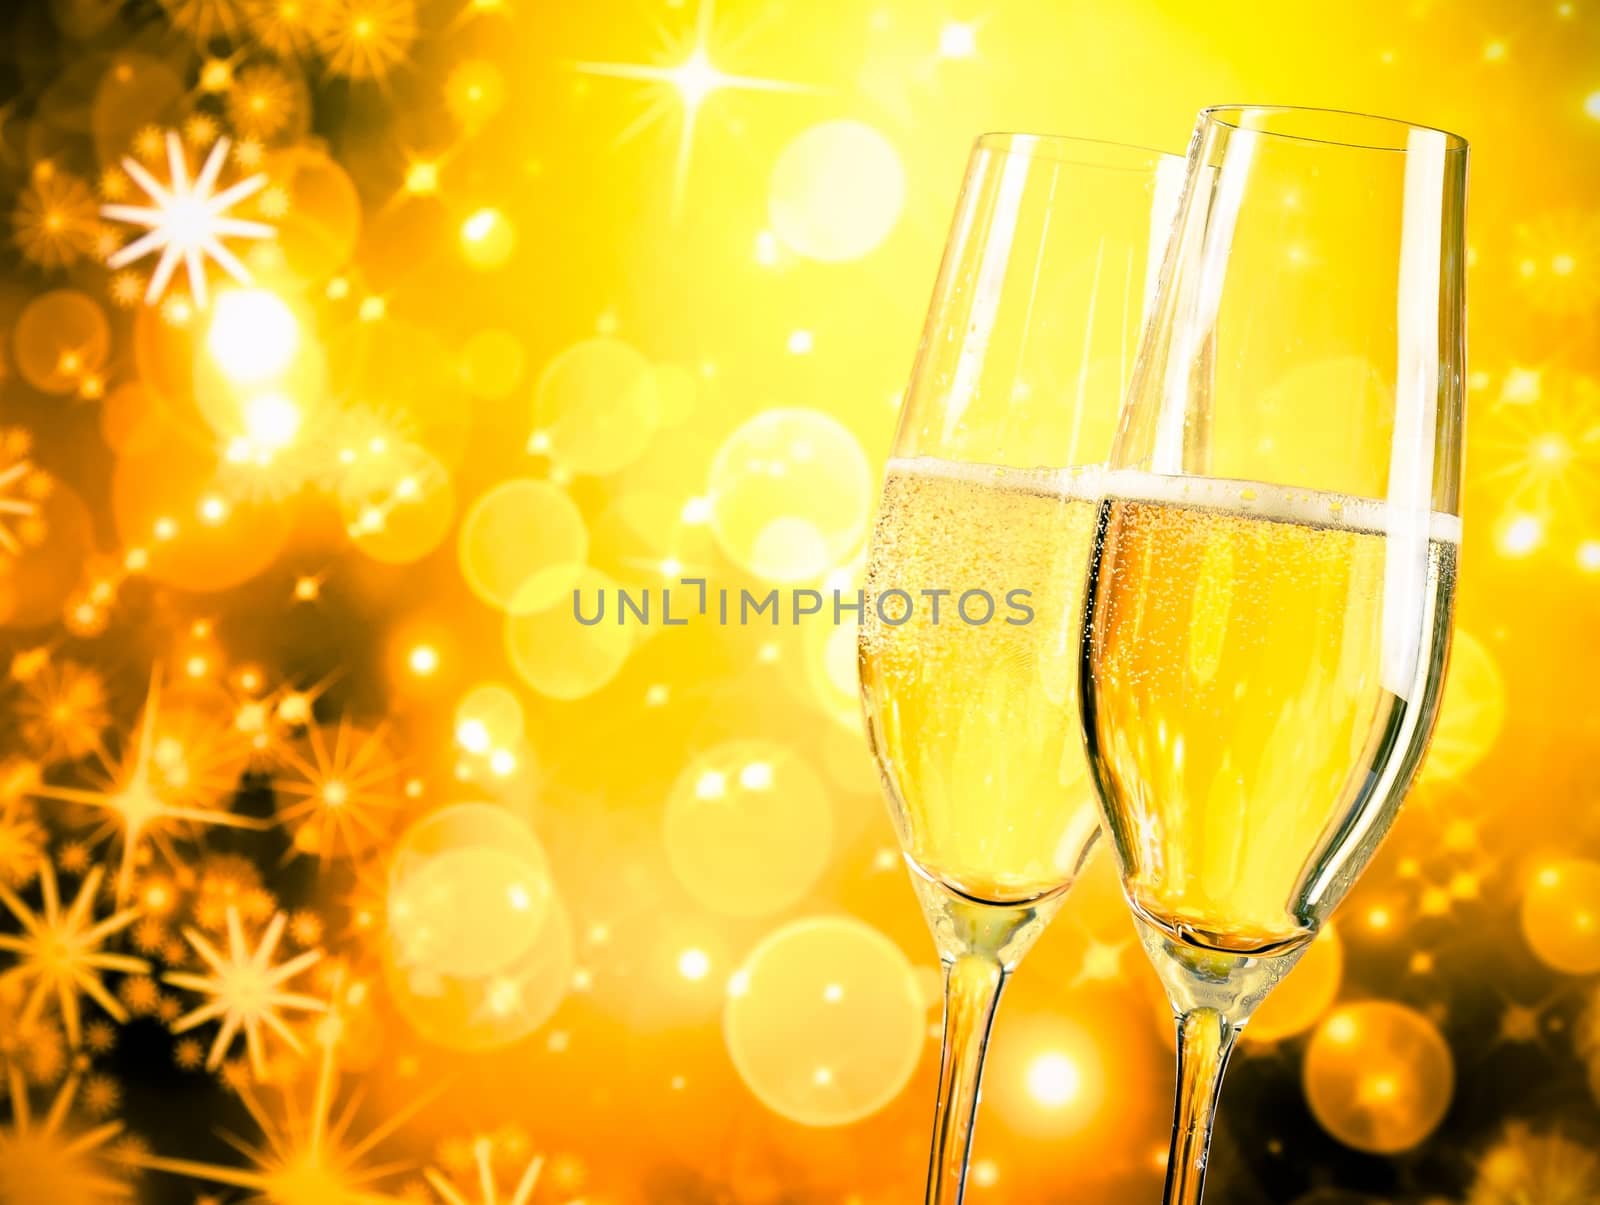 a pair of champagne flutes with golden bubbles on golden light background with space for text